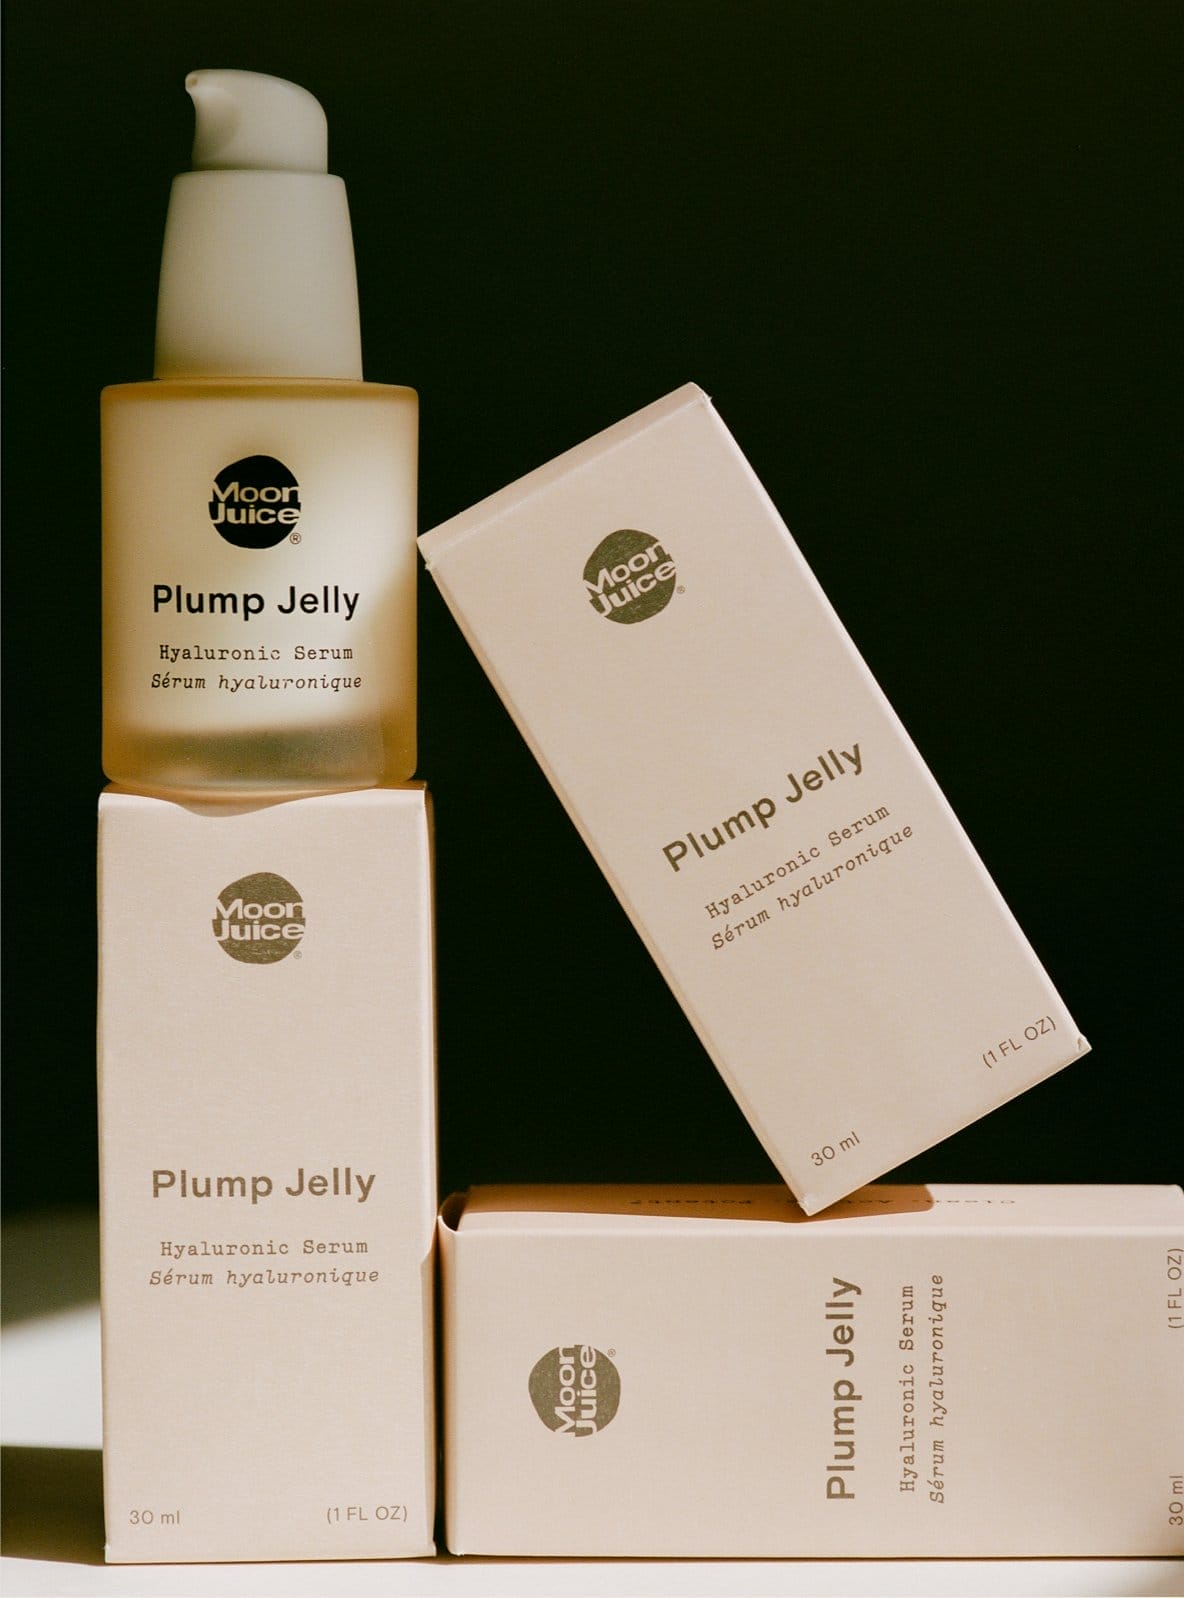 Boxes of Plump Jelly